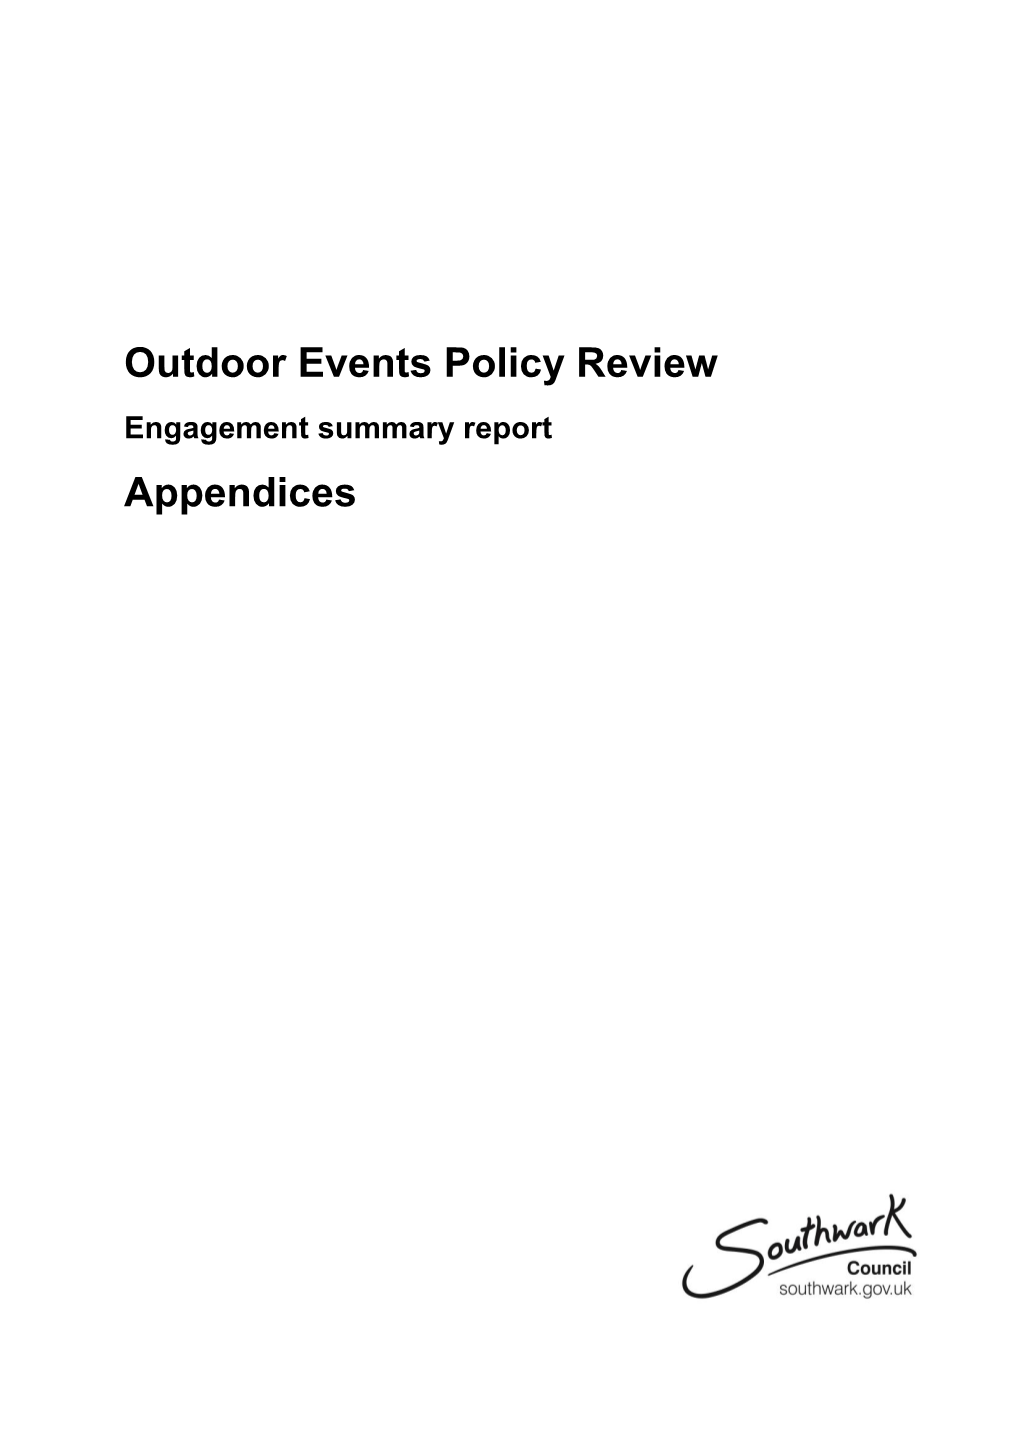 Outdoor Events Policy Review Appendices